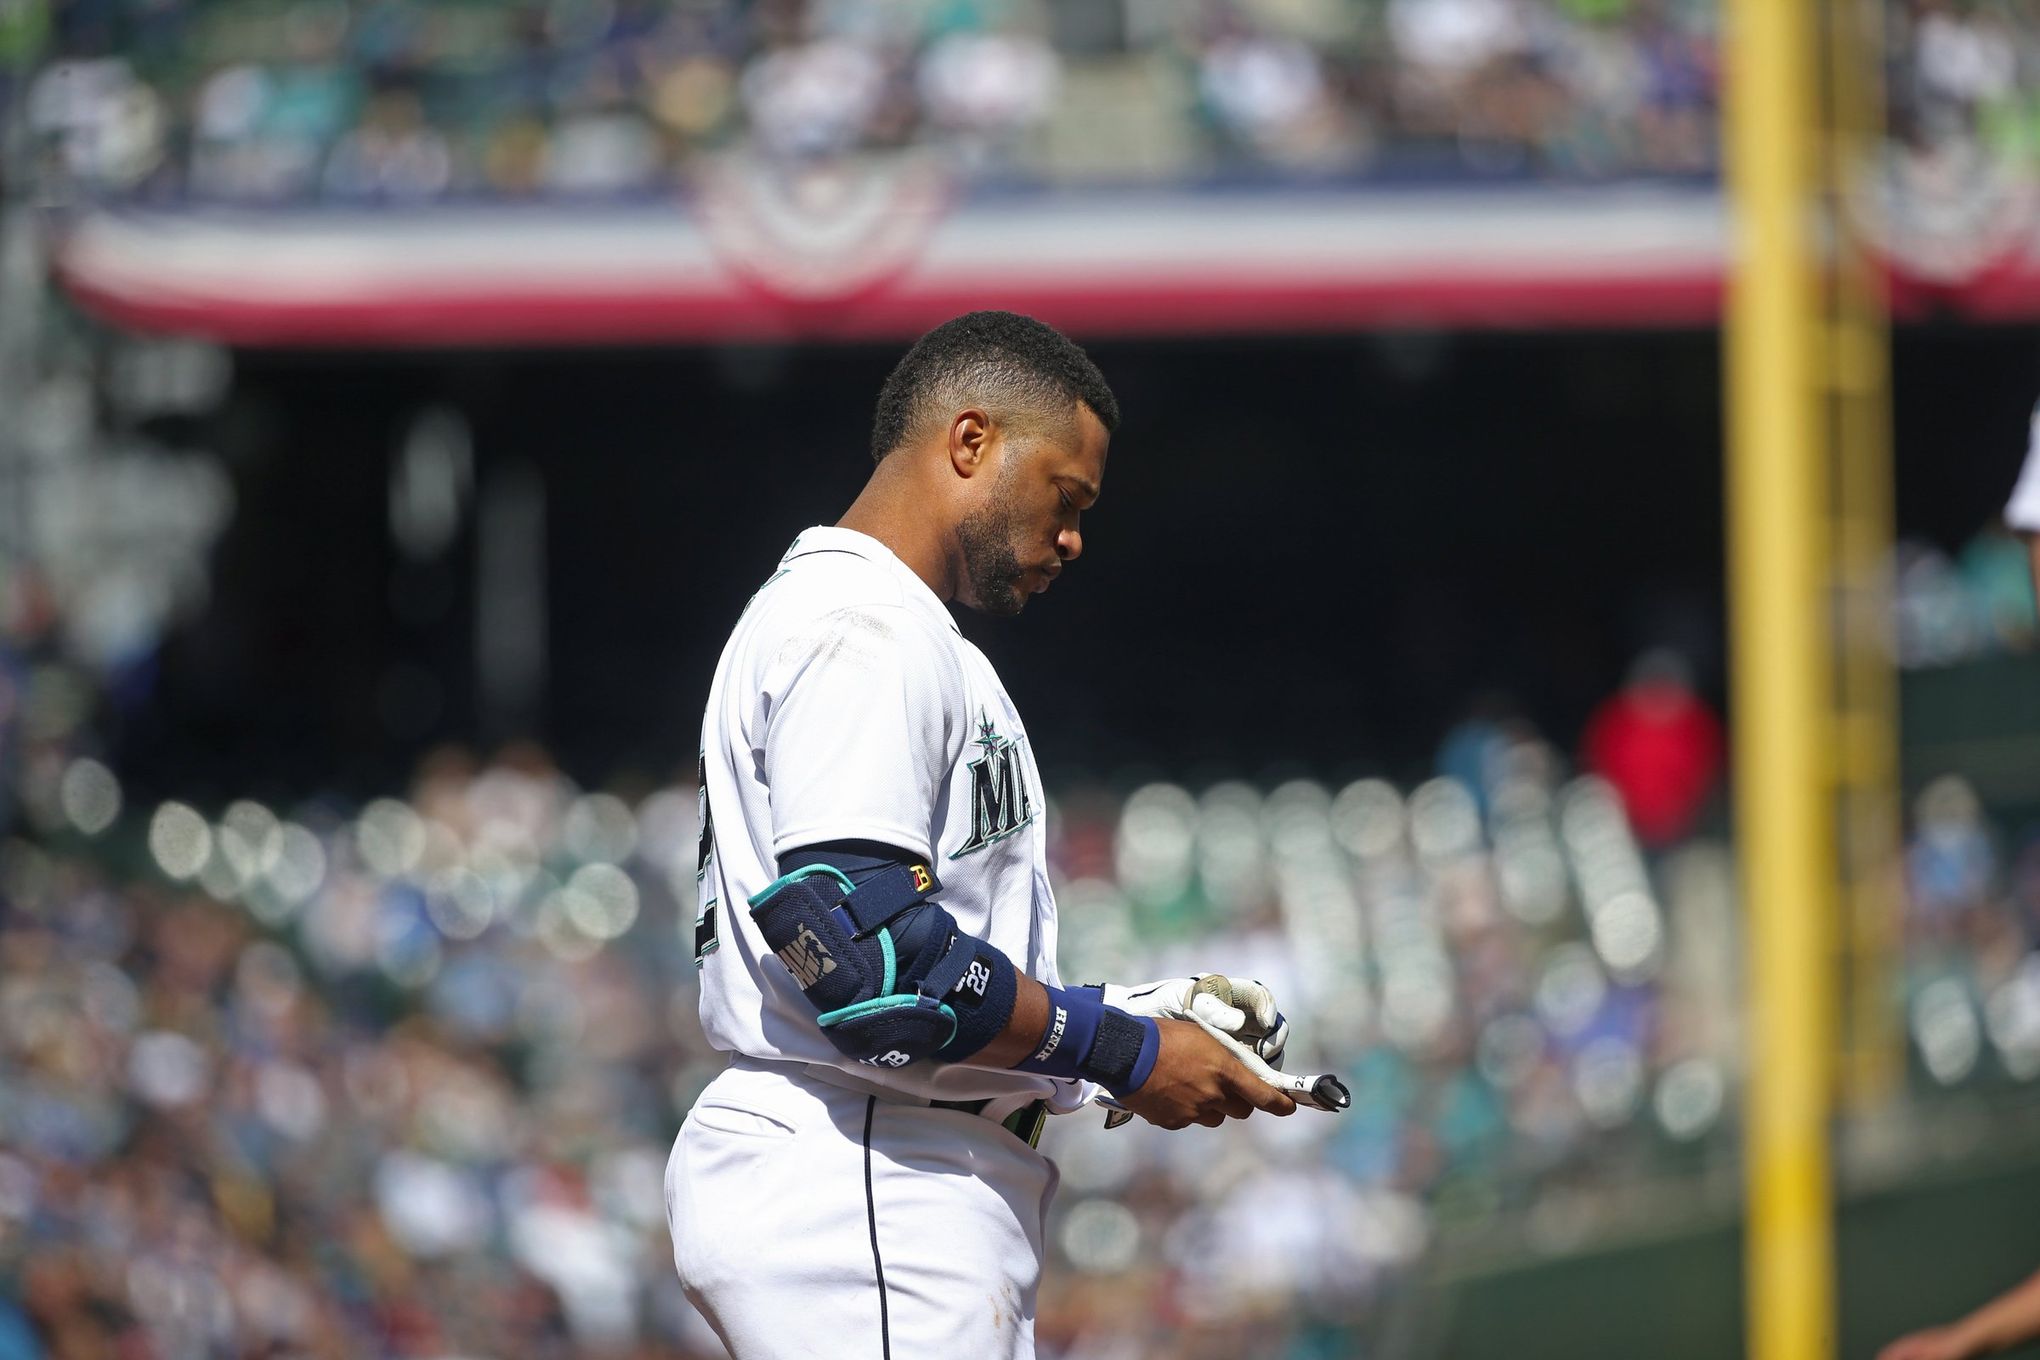 Robinson Cano speaks for first time since suspension: 'The hardest